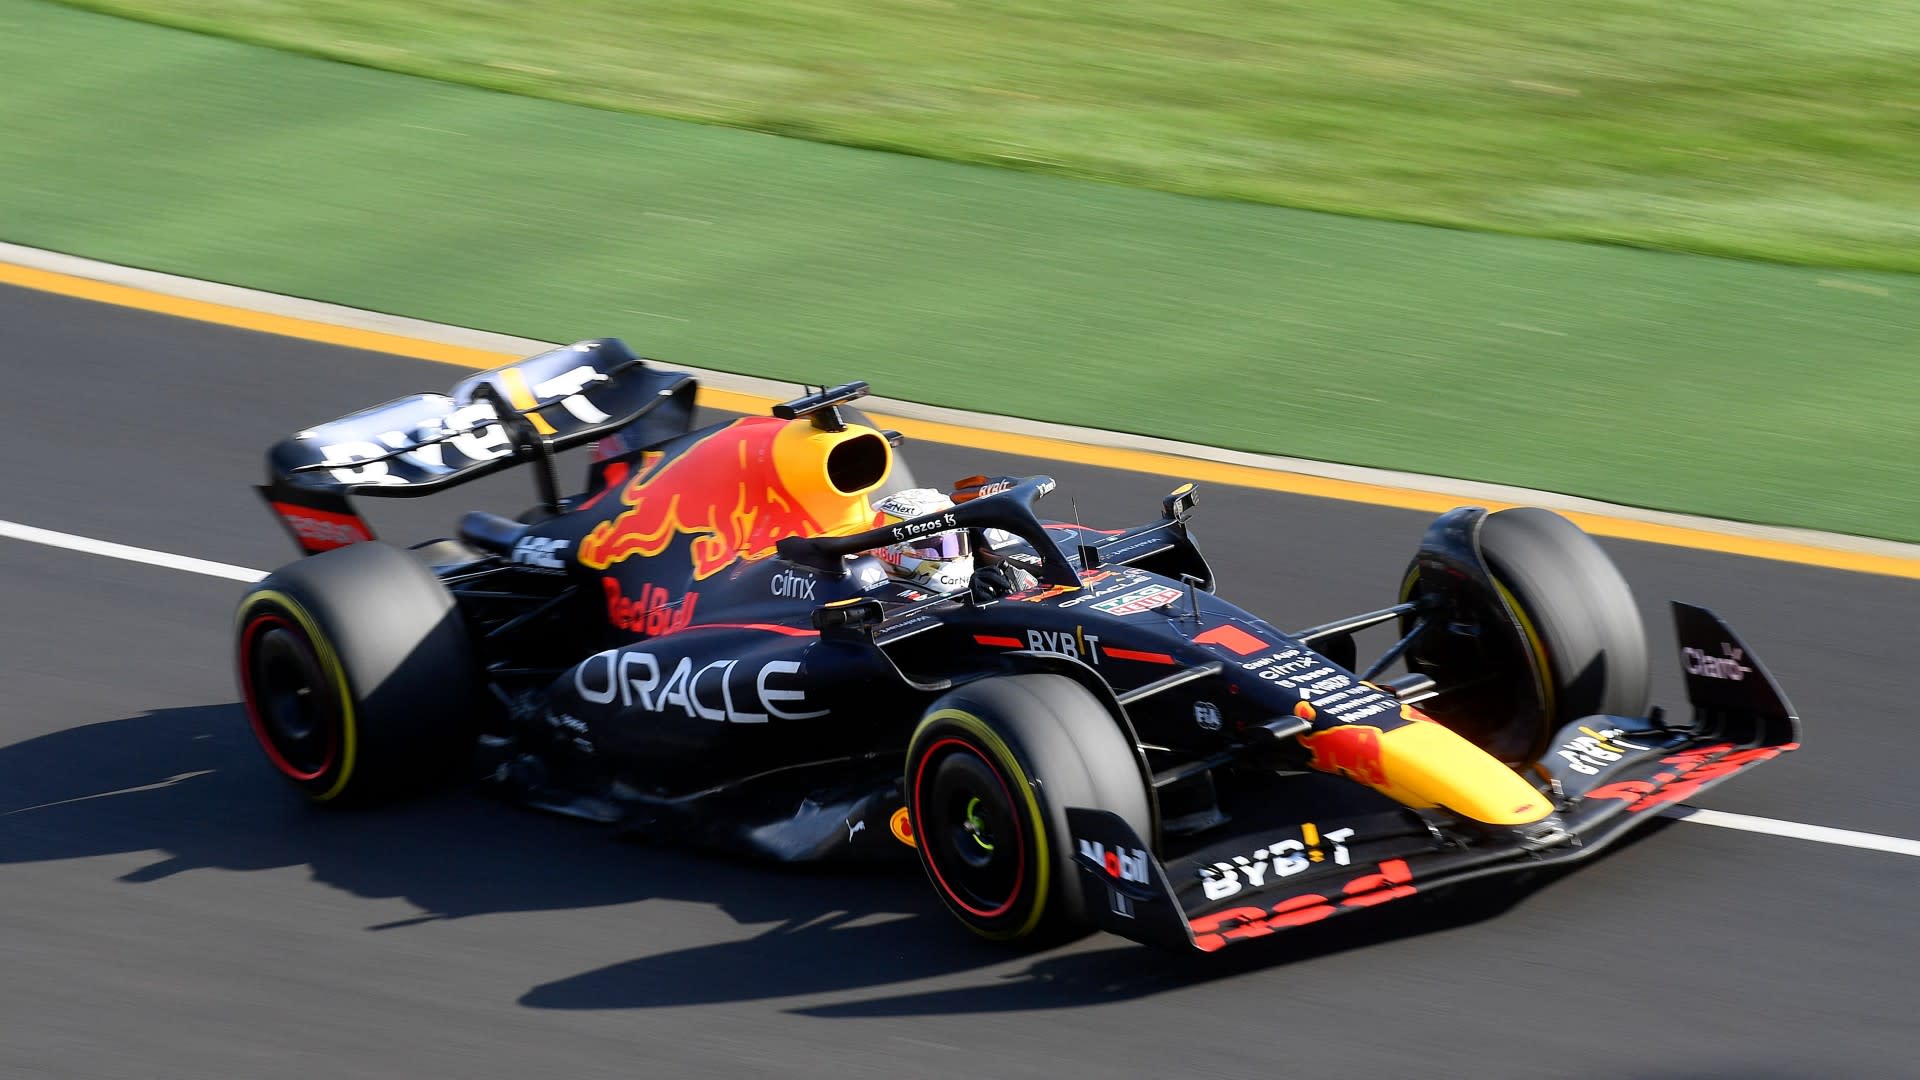 Tahiti cricket Decimal First Red Bull Powertrains engine to run before end of 2022, says Horner |  Formula 1®